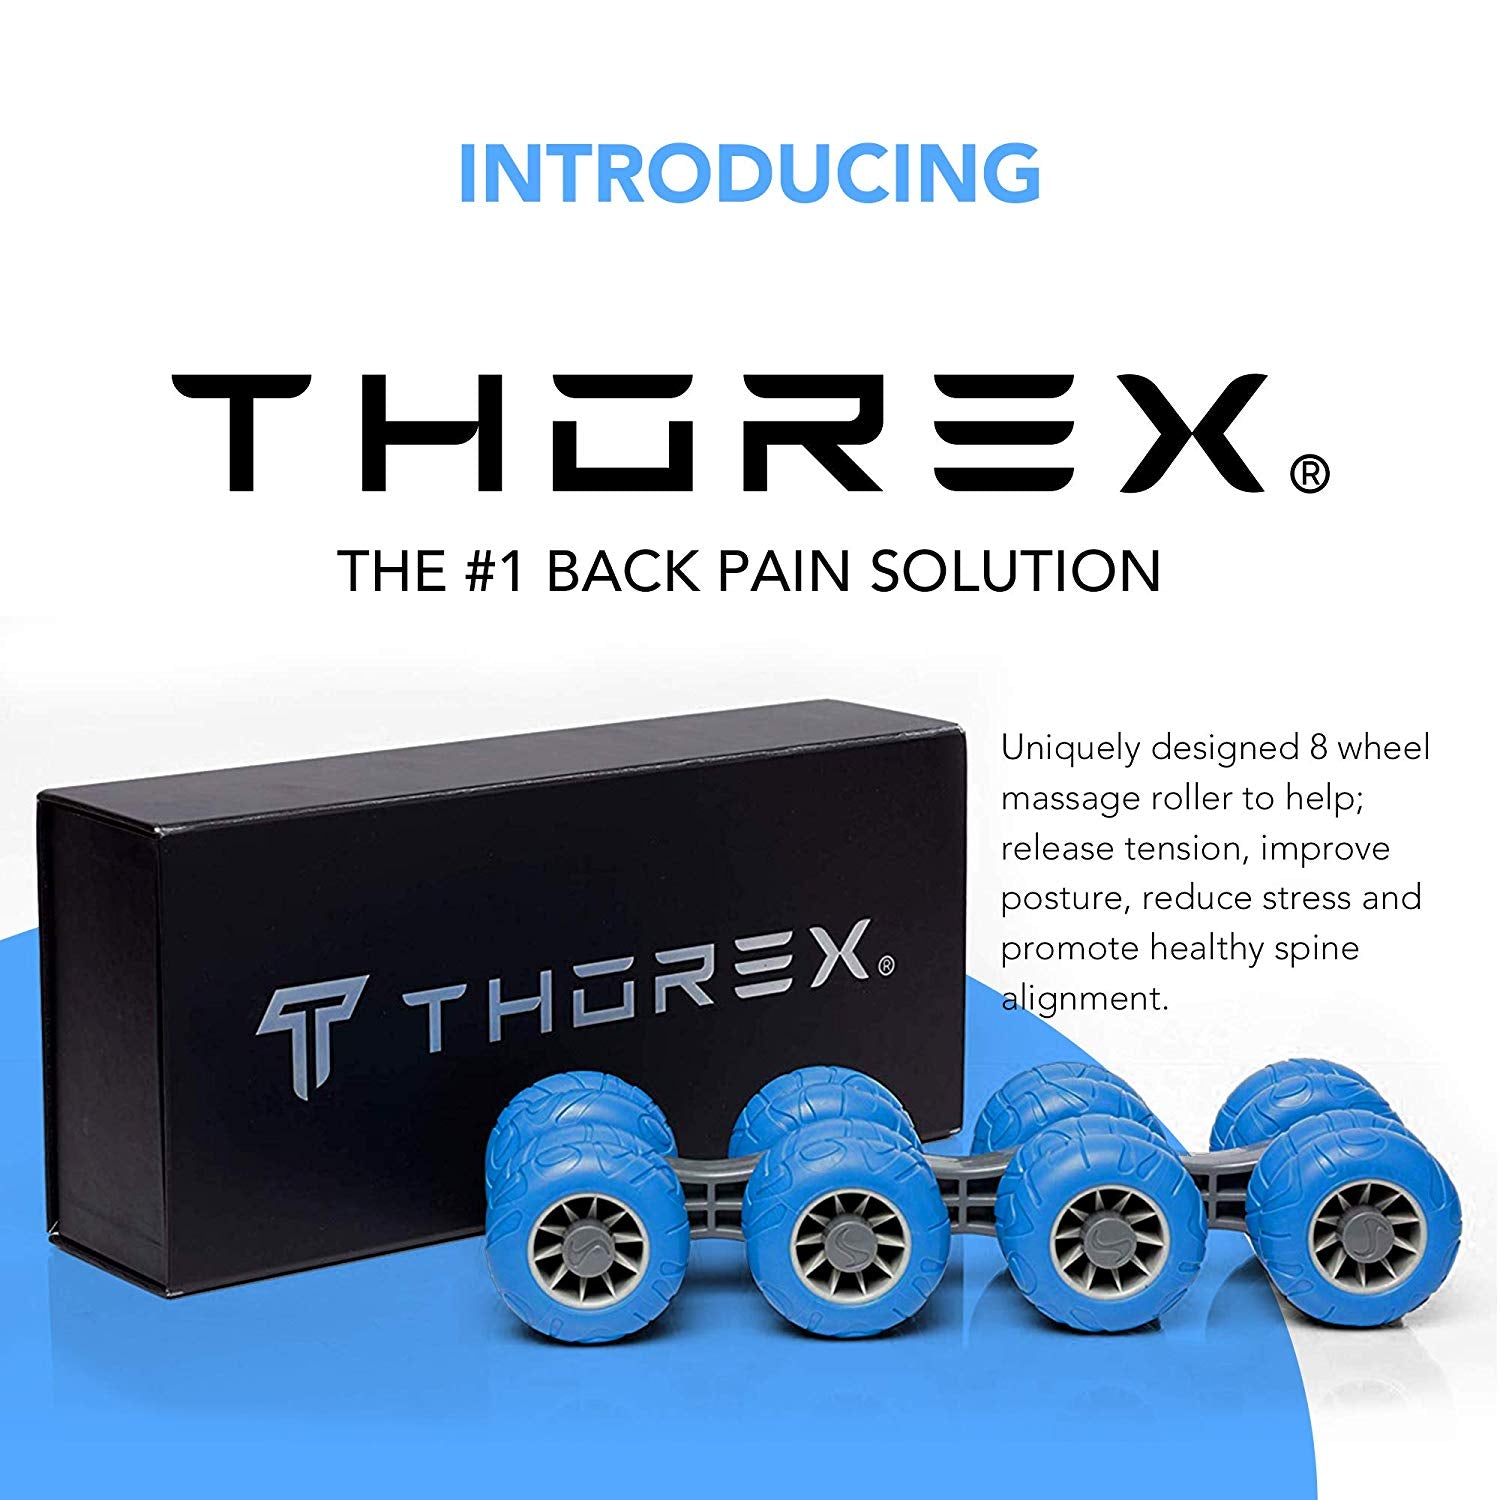 Finding Relief from Plantar Fasciitis with the THOREX Massager Roller